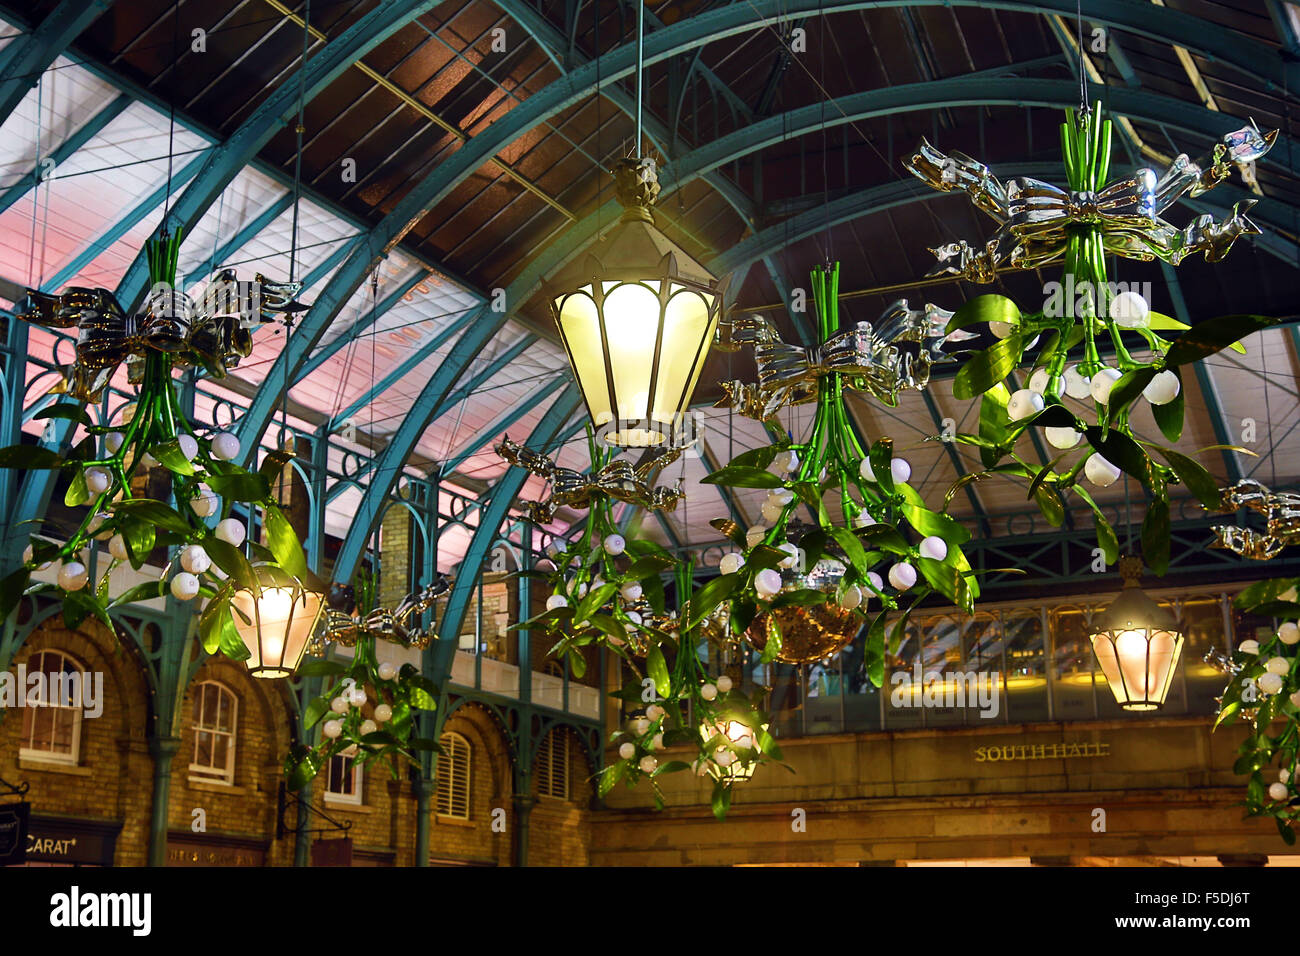 London, UK. 2nd November 2015. First sight of the new Covent Garden Mistletoe Christmas Decorations in London as they are installed in the market. The hanging boughs of mistletoe make a nice change to the giant Xmas tree baubles which have graced the halls of the market for the last couple of years. Credit:  Paul Brown/Alamy Live News Stock Photo